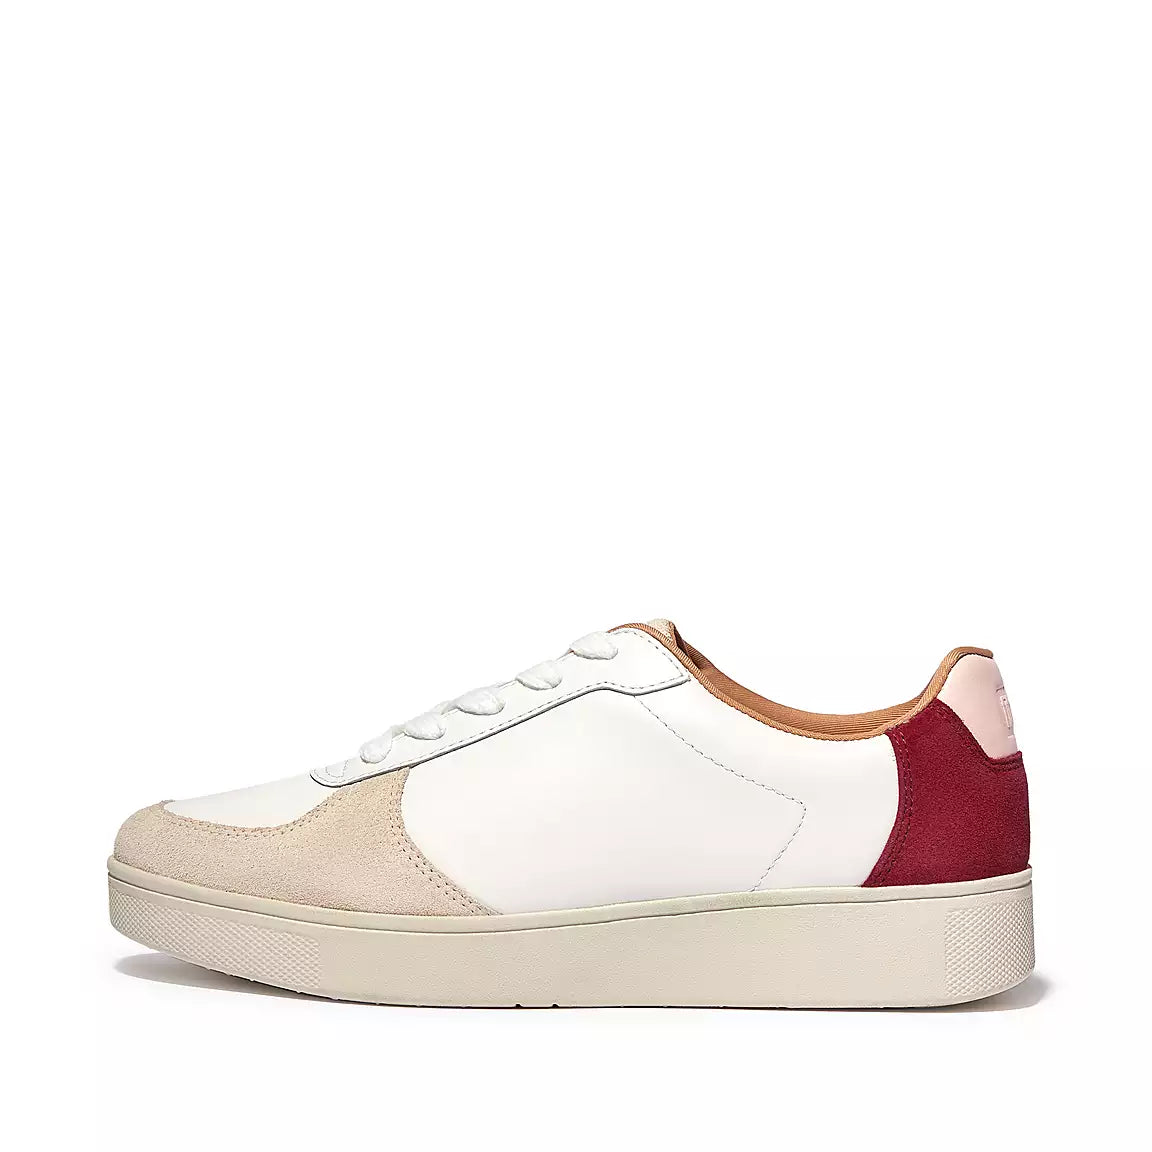 FitFlop FitFlop RALLY Leather/Suede Panel Trainers  White Red 4 